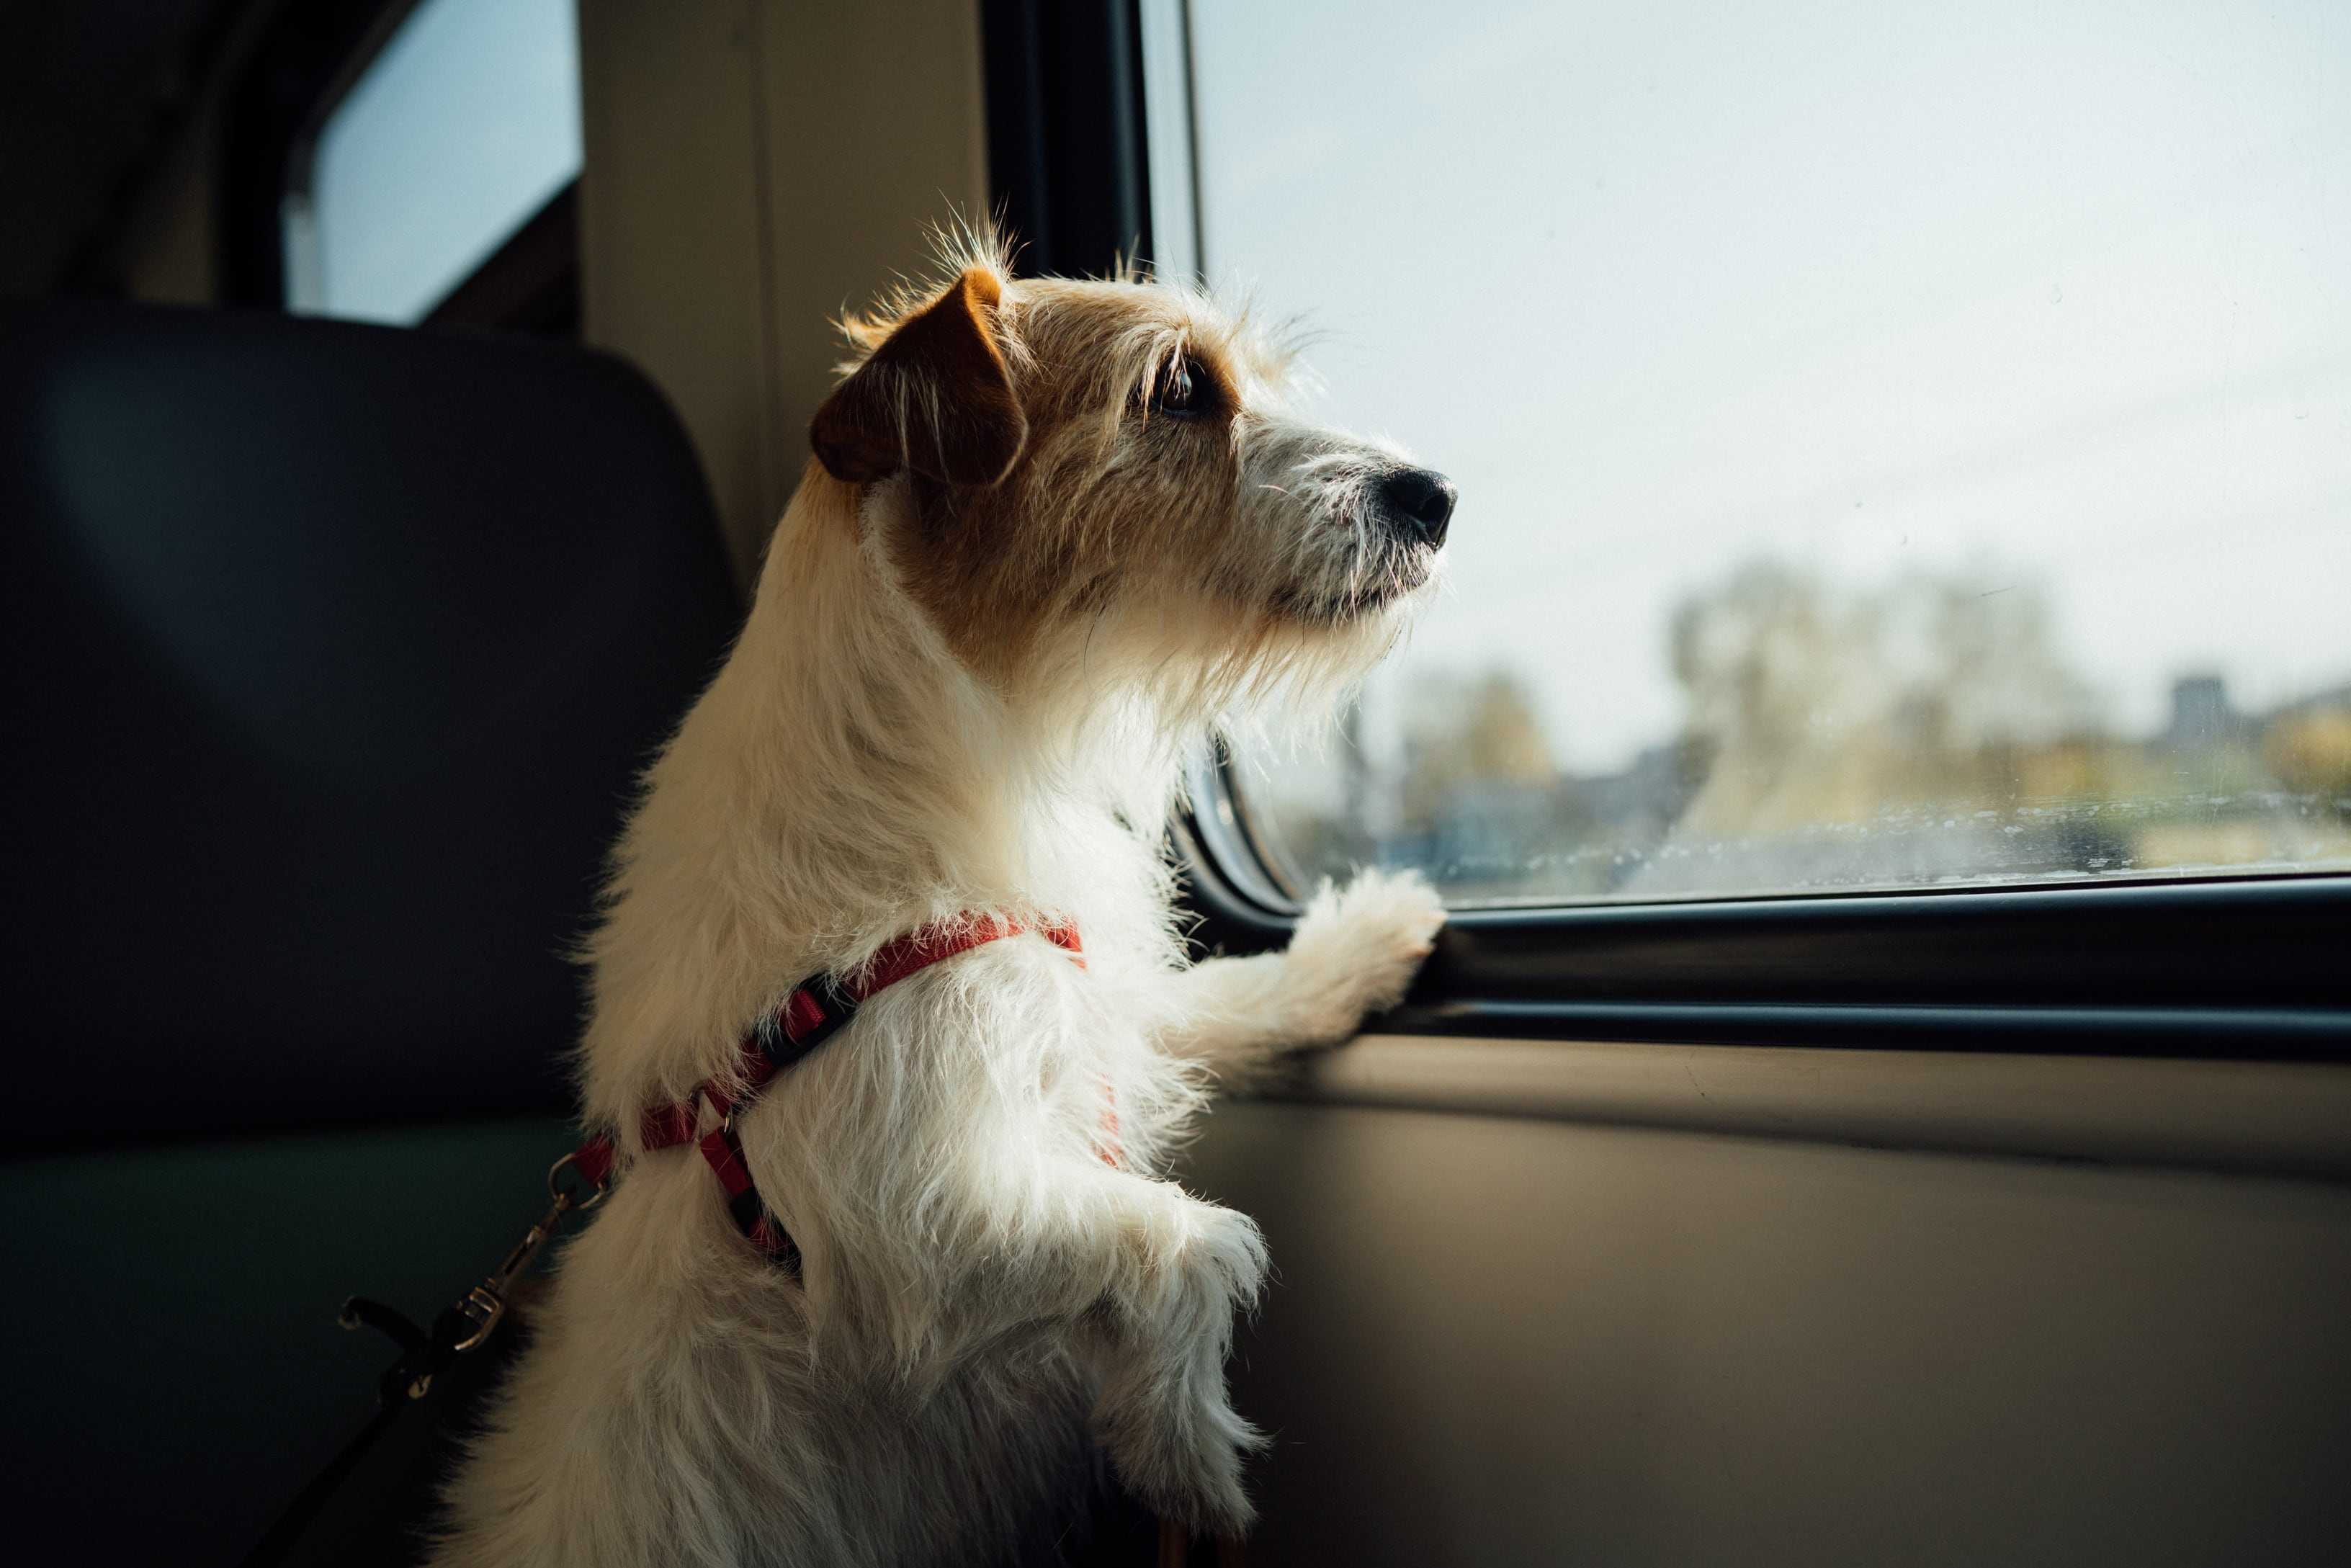 Dog-Friendly Travel: Exploring the World with Your Pooch